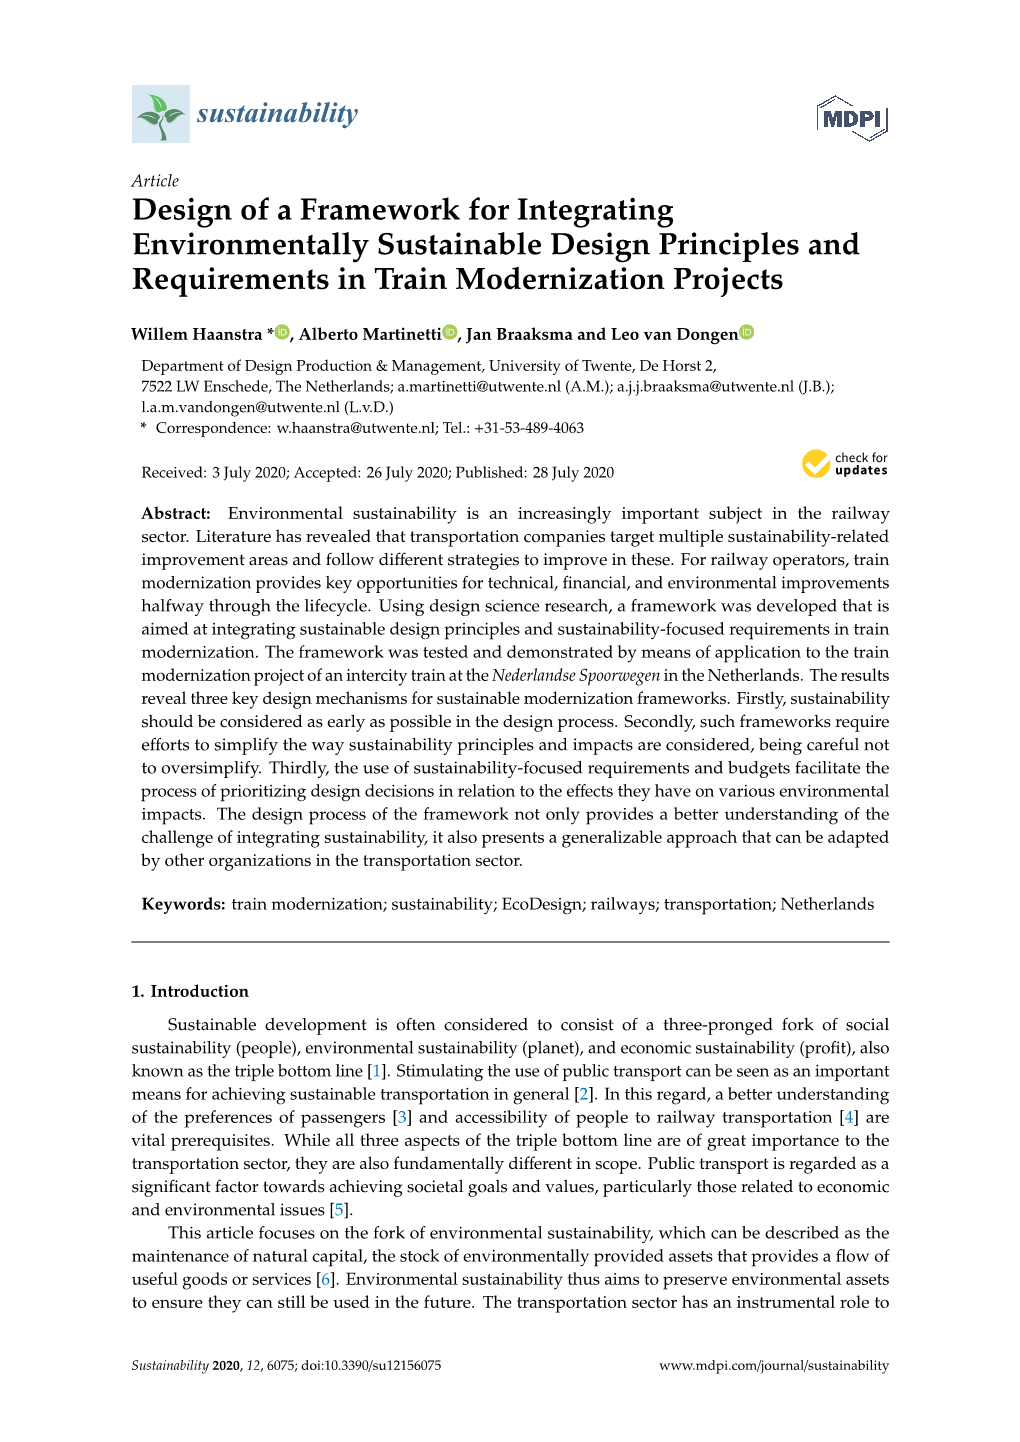 Design of a Framework for Integrating Environmentally Sustainable Design Principles and Requirements in Train Modernization Projects